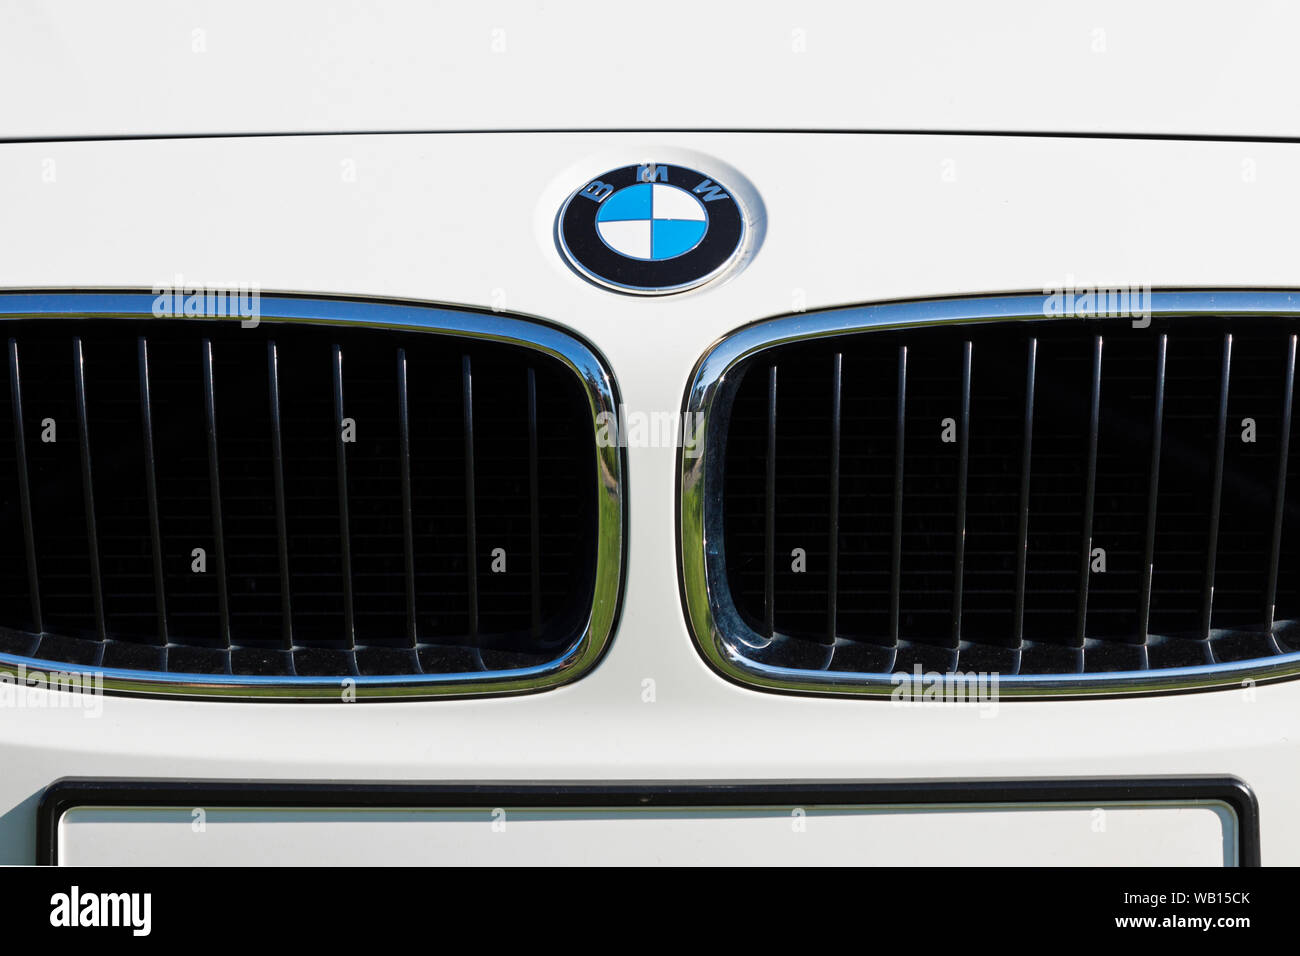 Stade, Germany - August 22, 2019: BMW logo above grill on front of white car. Stock Photo